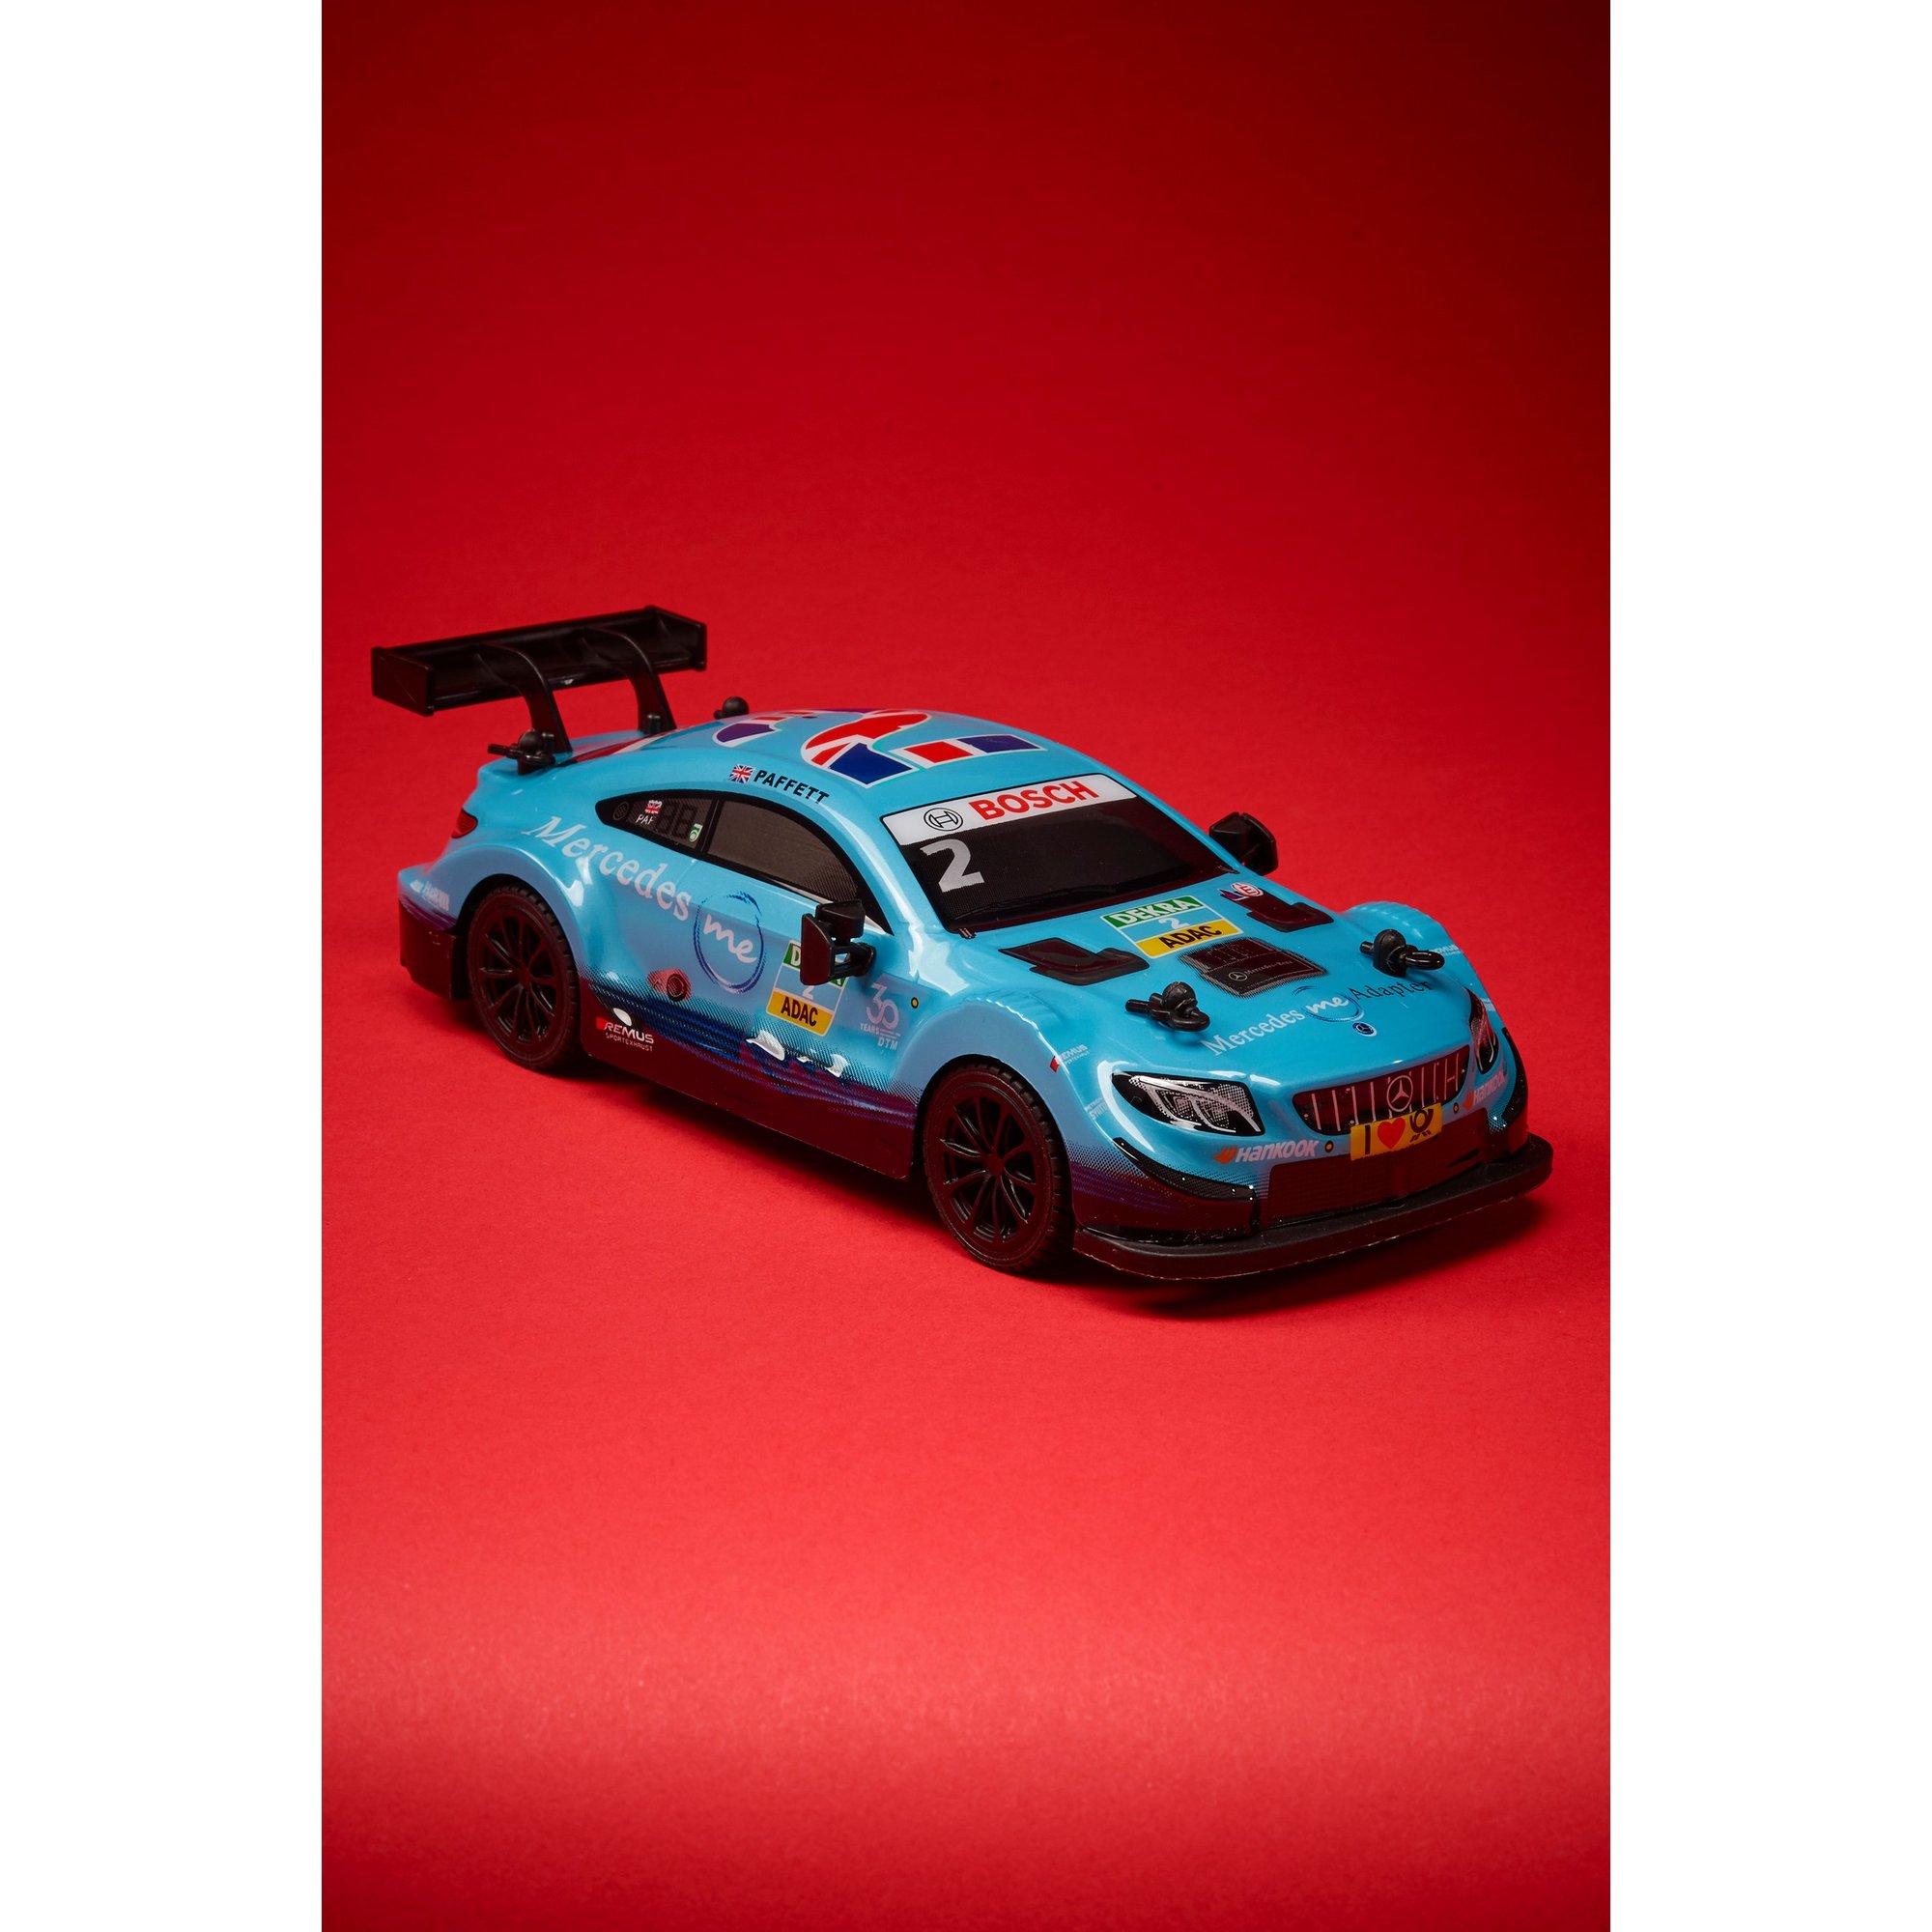 Image of 1:24 Scale Remote Control Mercedes AMG CG3 DTM